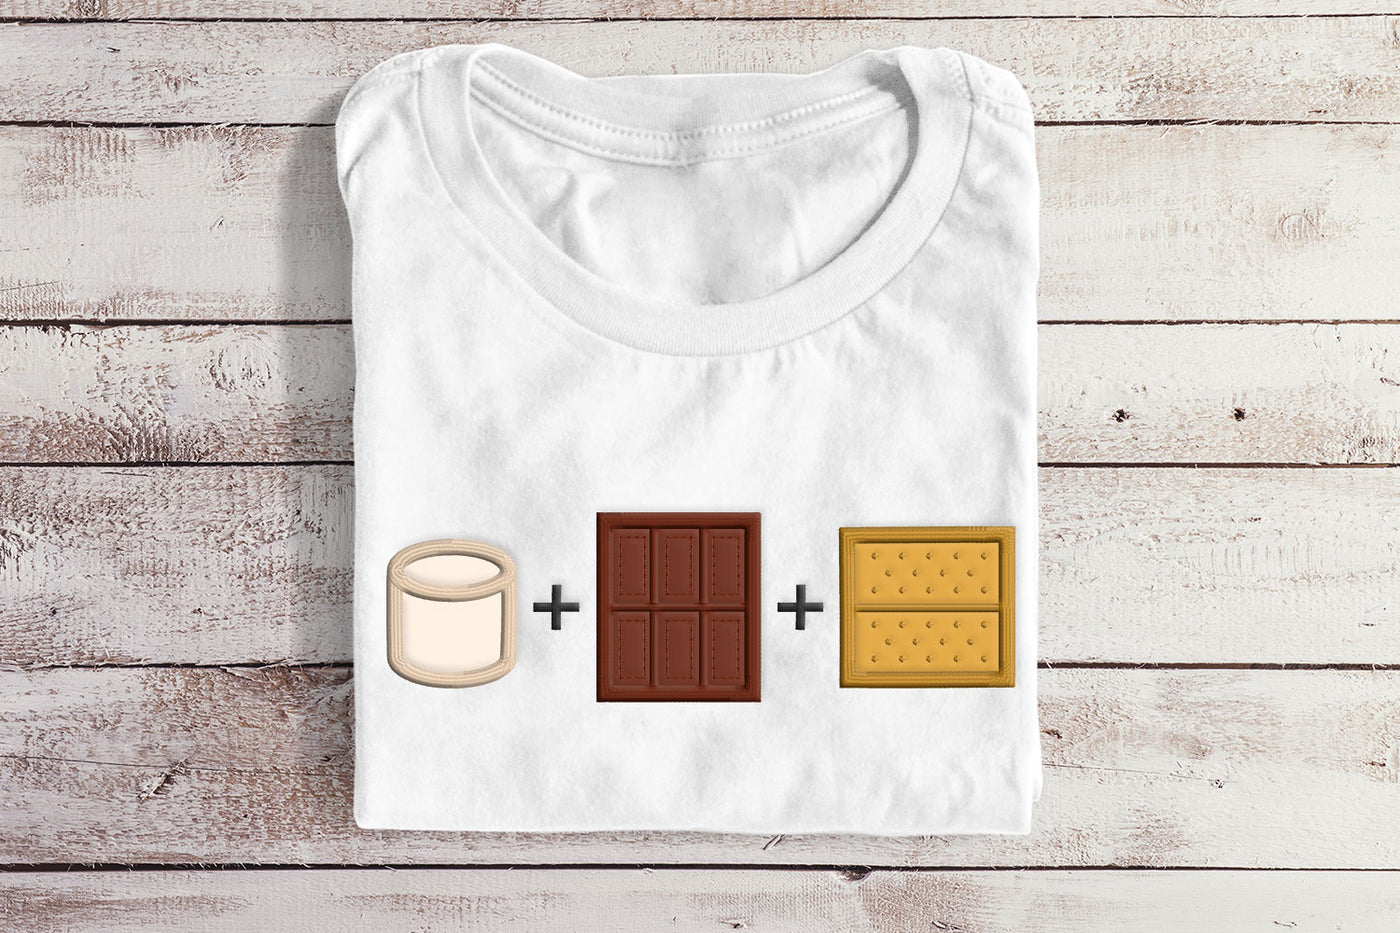 smore formula applique with marshmallow, chocolate bar, and graham cracker embroidery designs